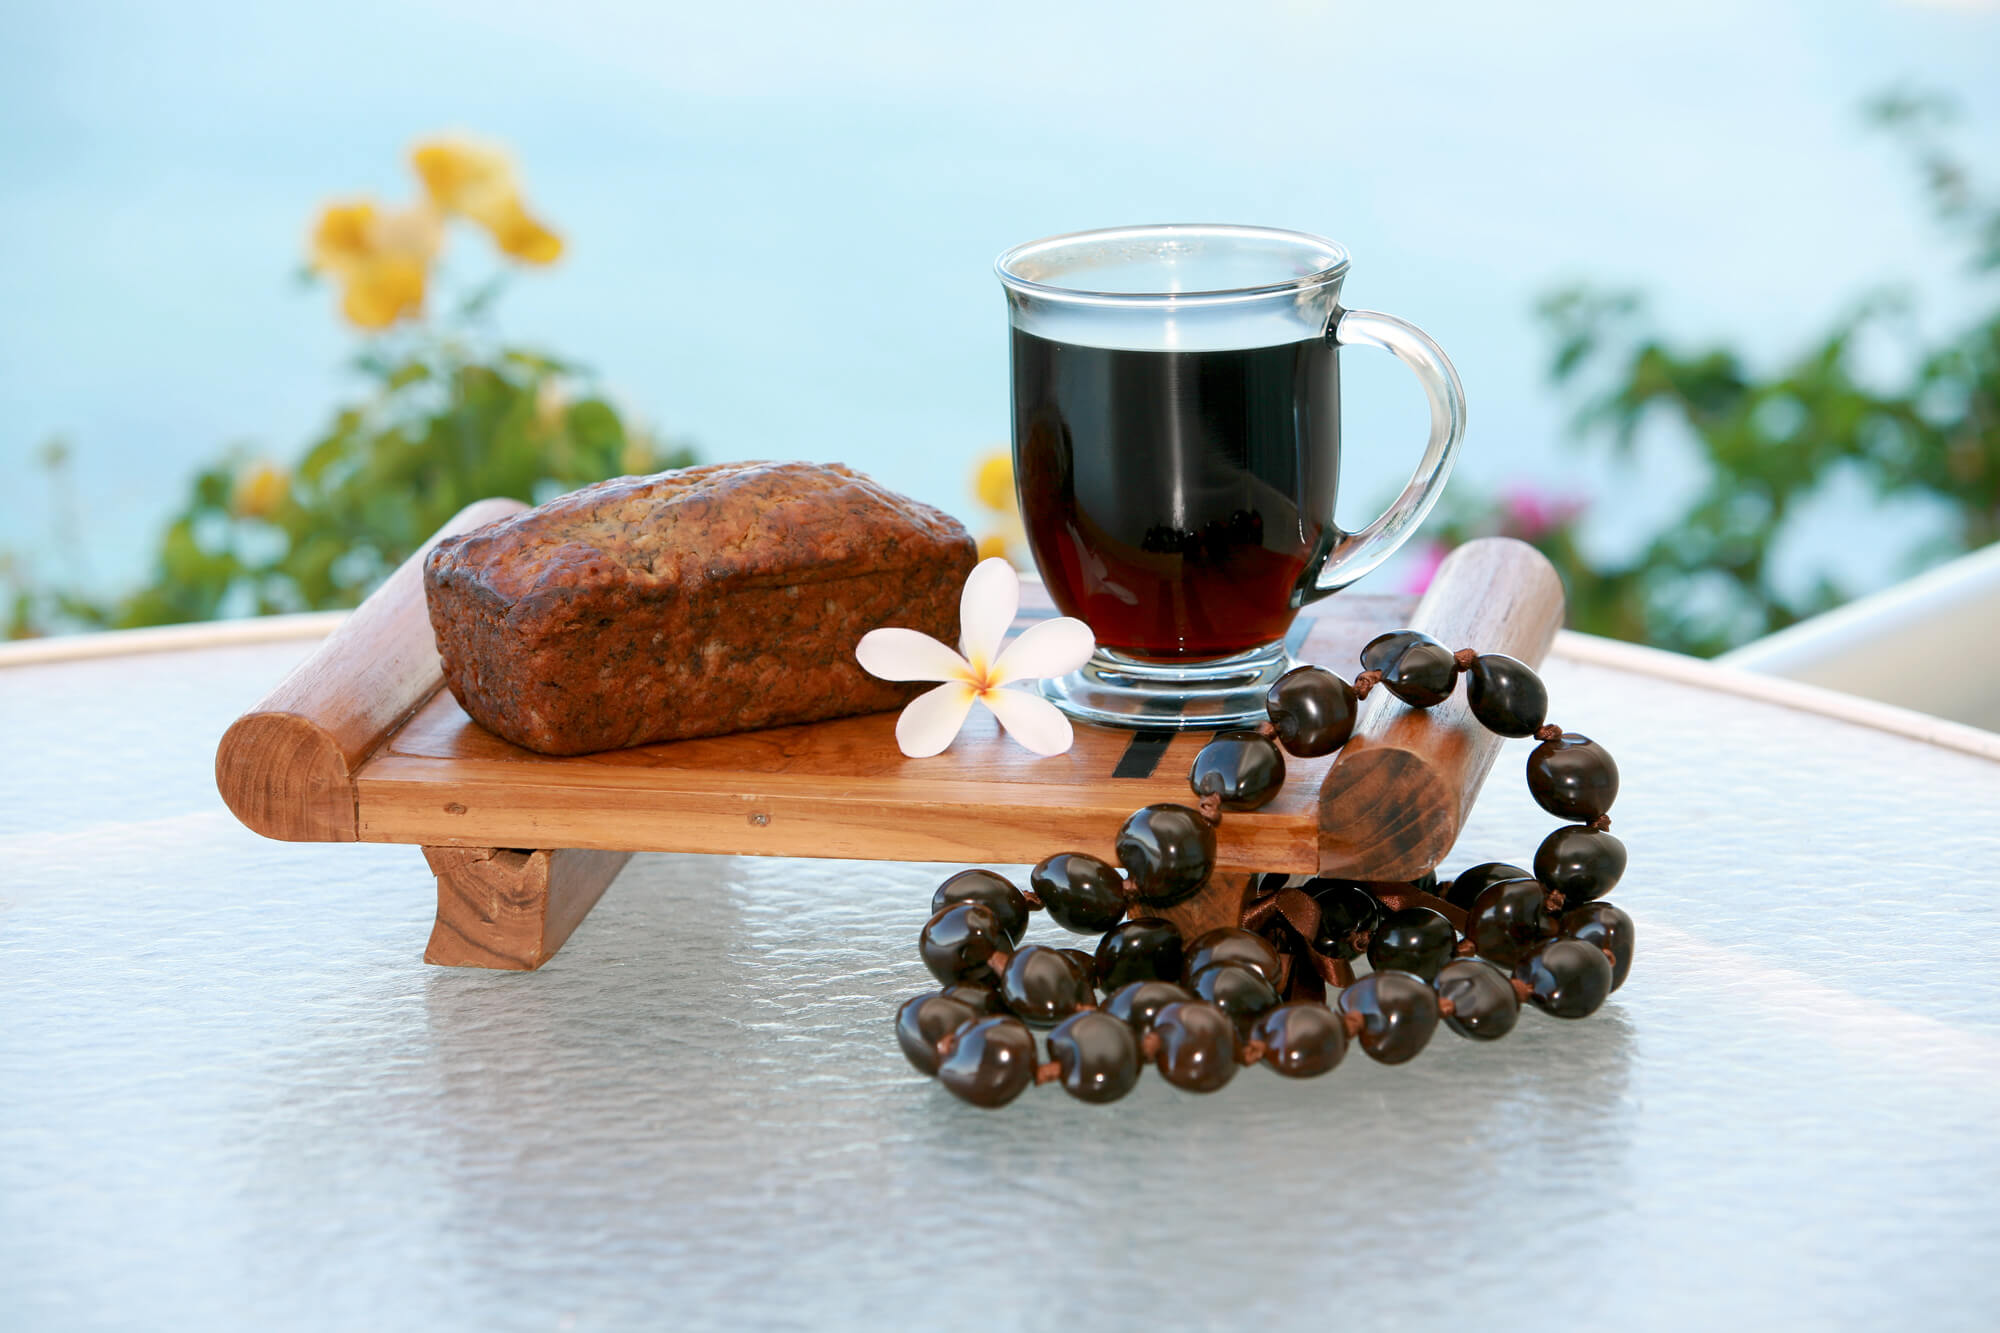 Find out where to eat on Maui with kids recommended by top Hawaii blog Hawaii Travel with Kids! Image of Hawaiian banana bread, coffee, and a kukui nut lei on a table with a tropical background